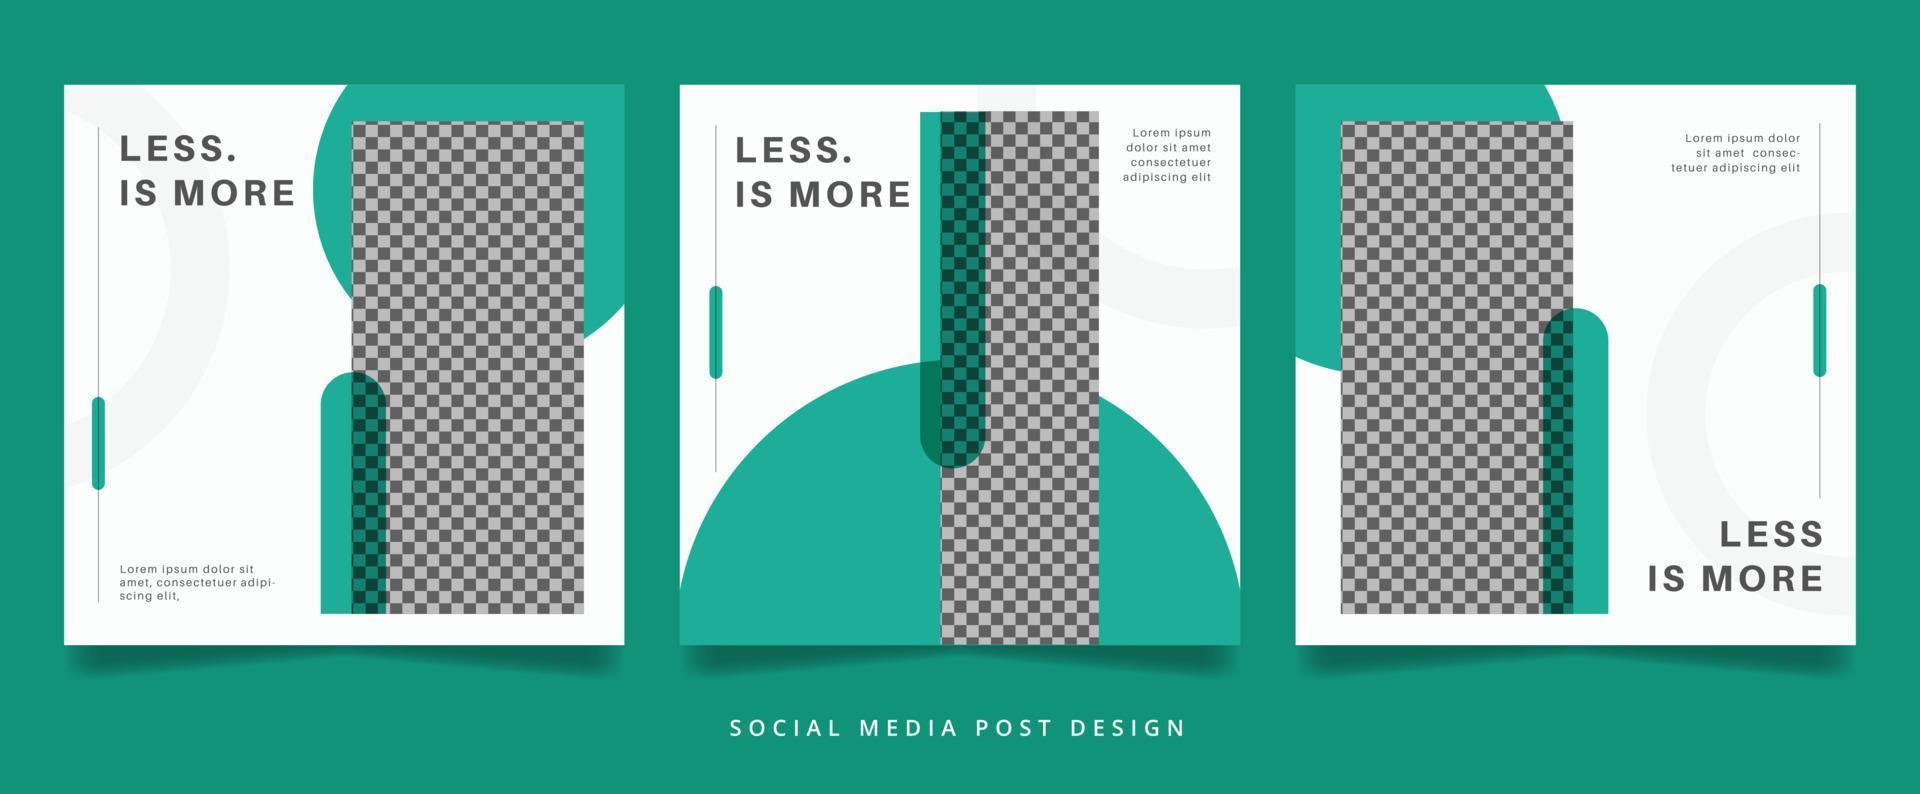 less is more flyer o banner sui social media vettore